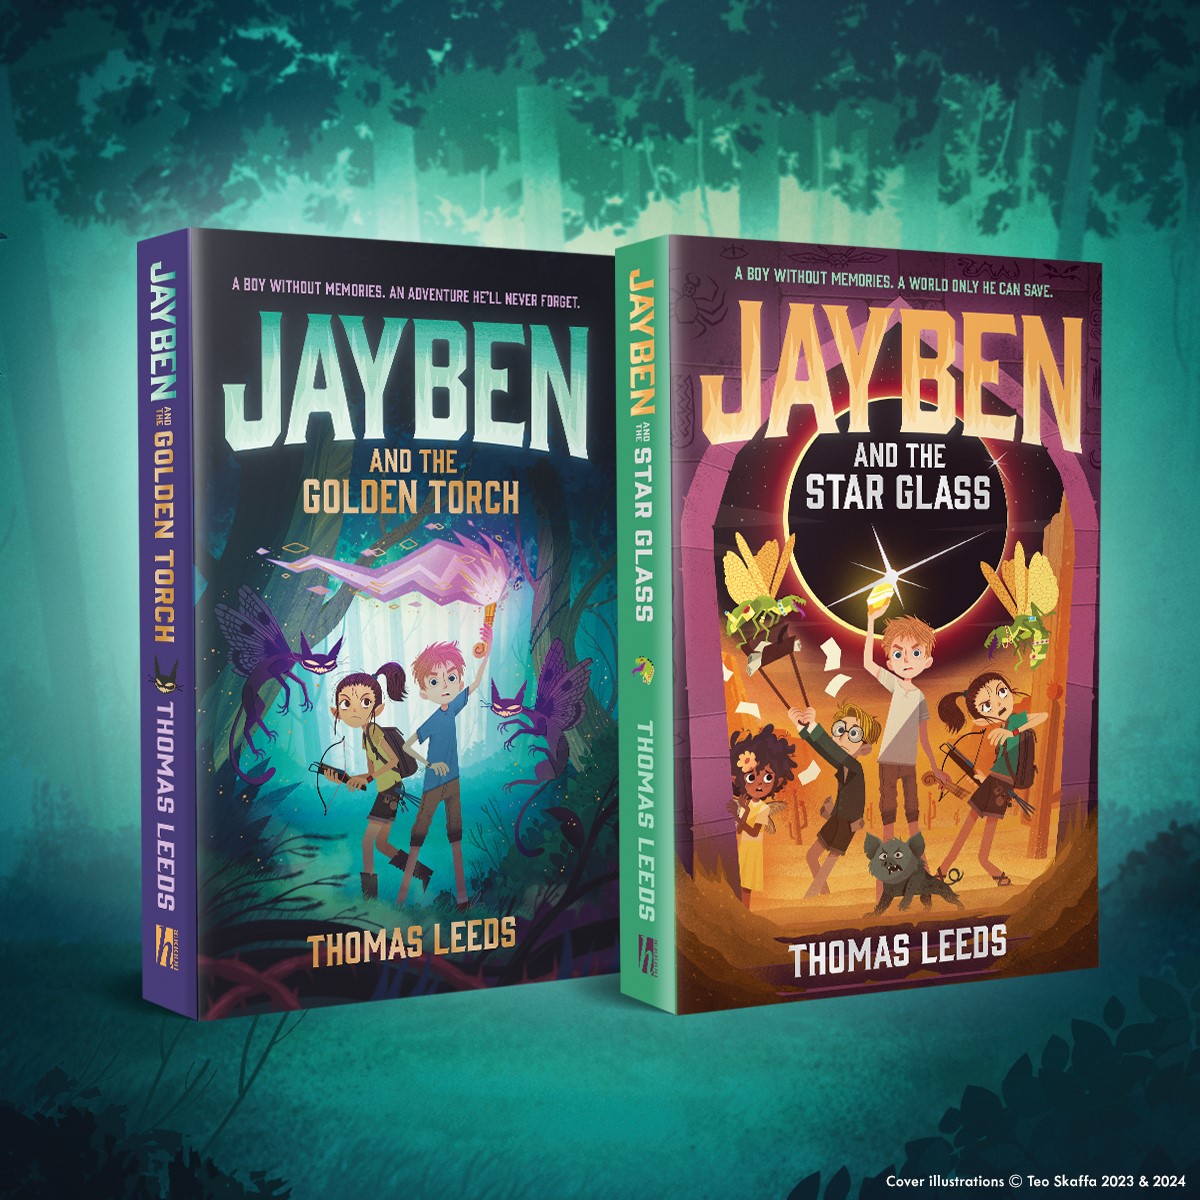 Today is #NationalMemoryDay! Start conversations in your classroom with this immersive fantasy series from @ThomasLeeds. A story of courage, hope and friendship about a boy with no memories and a world that only he can save. Supported by resources: brnw.ch/21wI4Kv